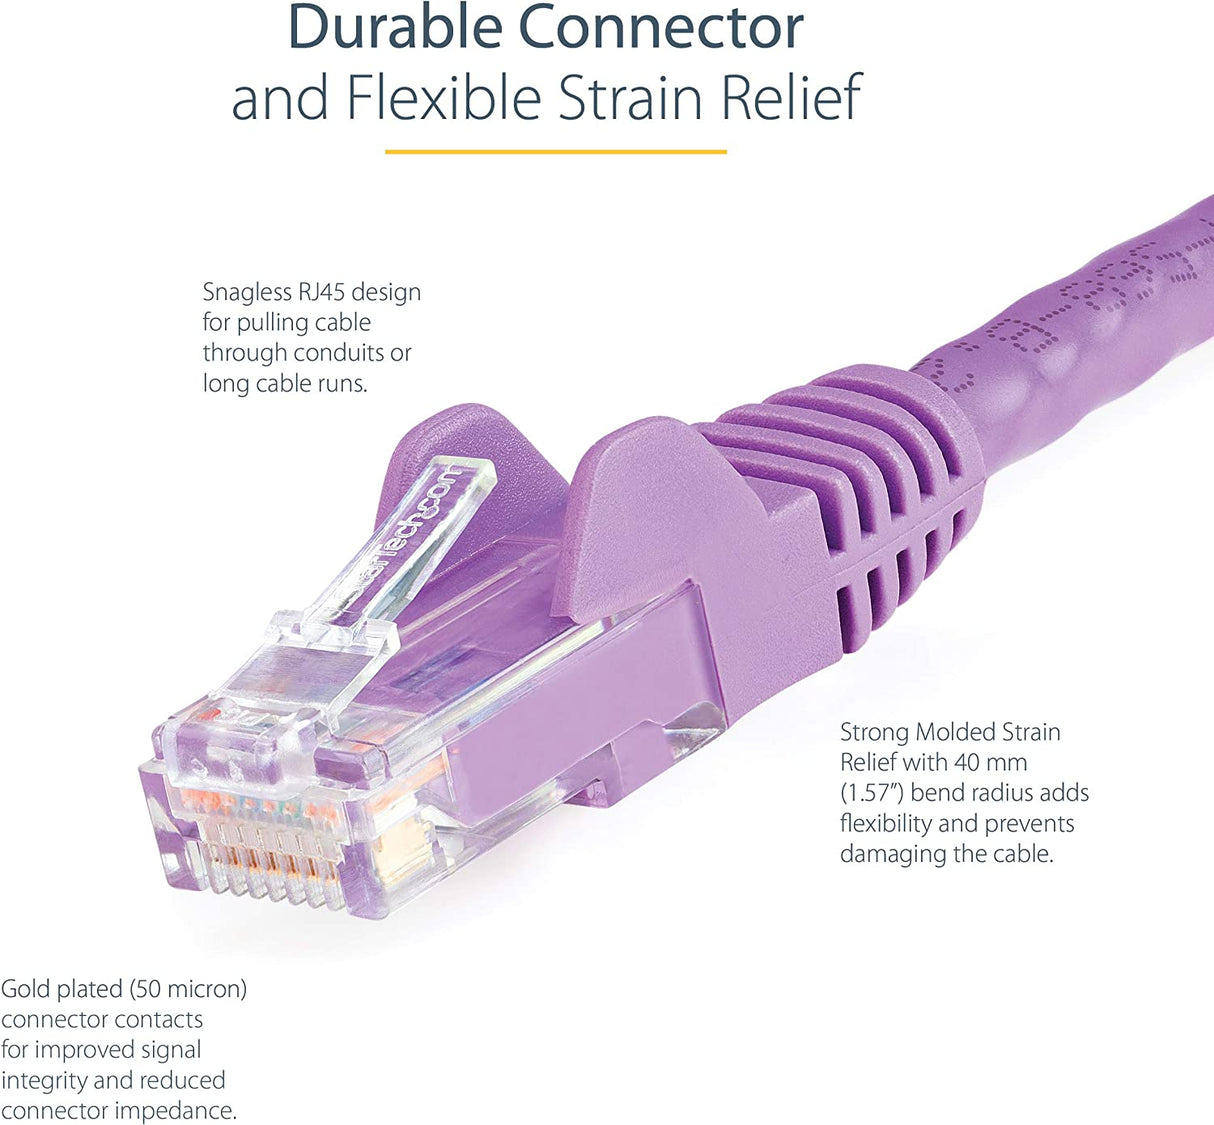 StarTech.com 75ft CAT6 Ethernet Cable - Purple CAT 6 Gigabit Ethernet Wire -650MHz 100W PoE++ RJ45 UTP Category 6 Network/Patch Cord Snagless Fluke Tested UL/TIA Certified (N6PATCH75PL) Purple 75 ft / 22.8 m 1 Pack